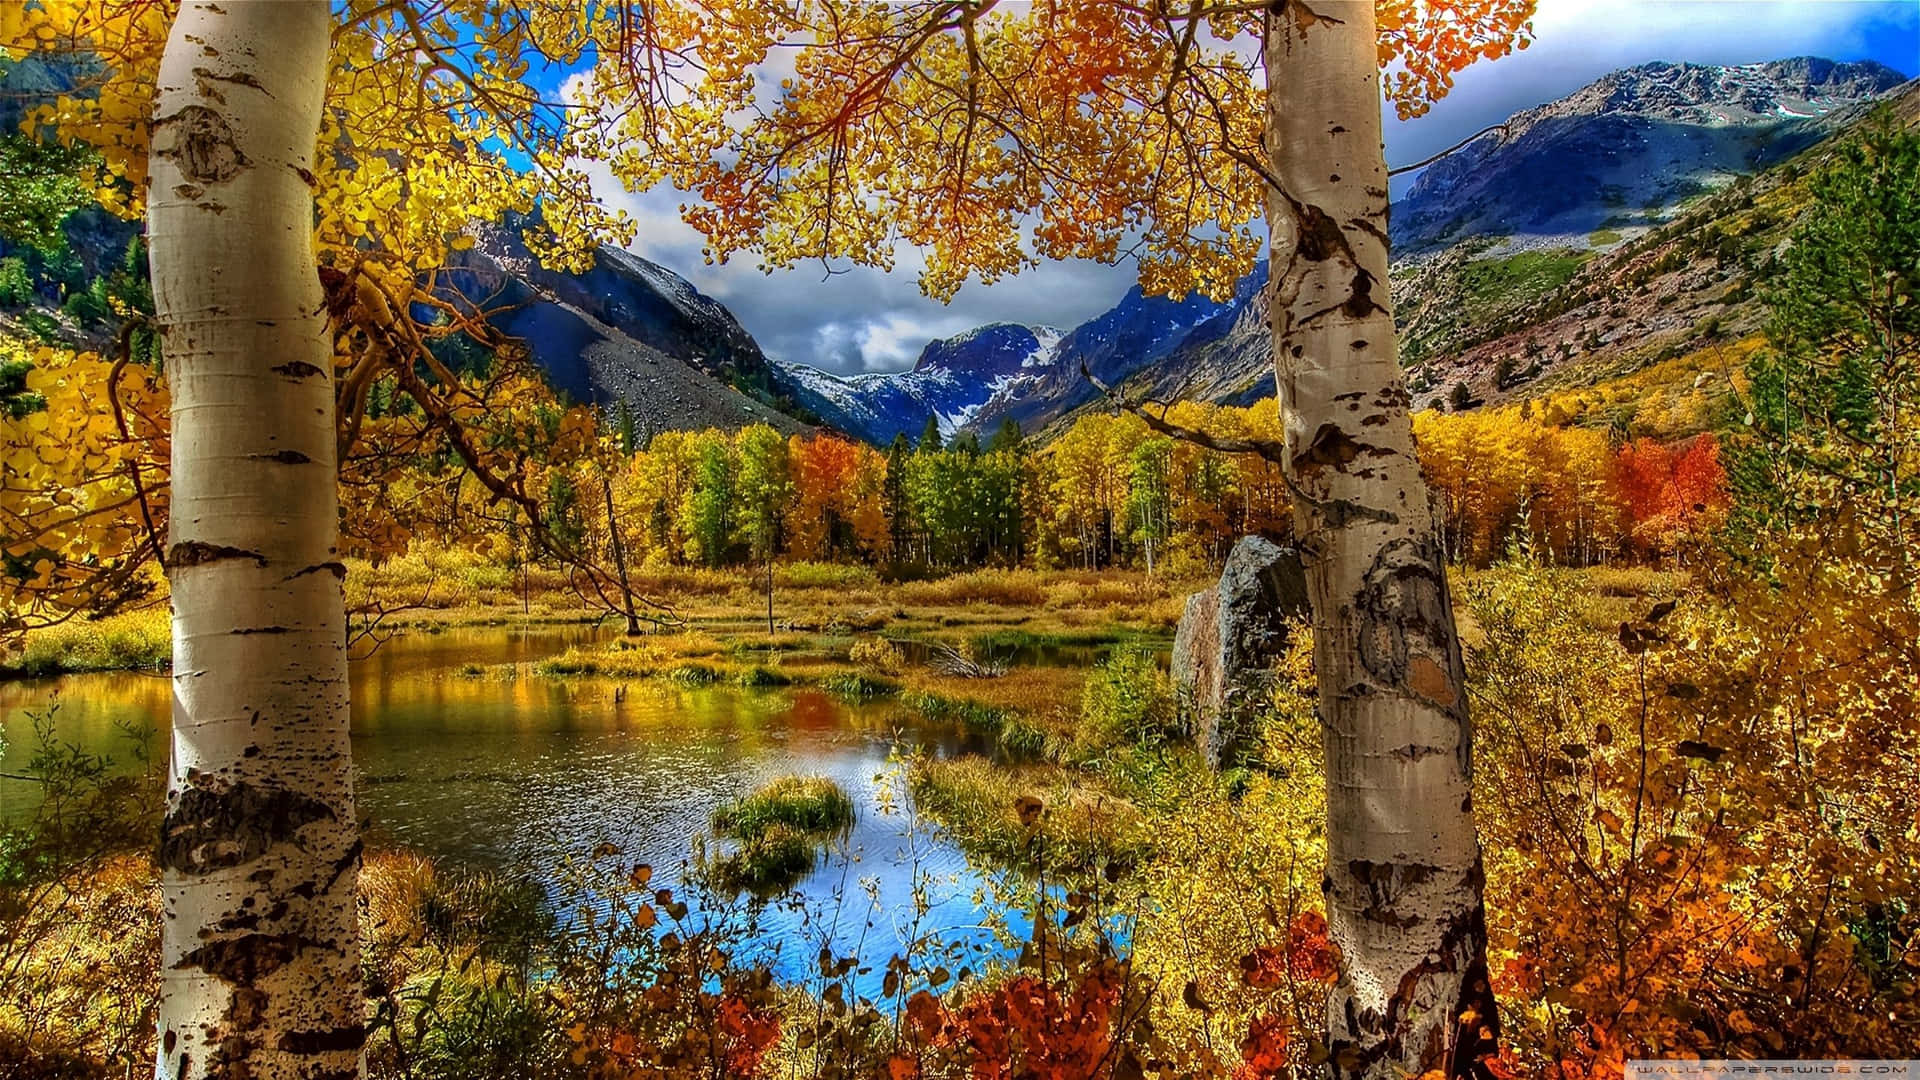 Beautiful moments in nature: a peaceful look of a calm autumn day Wallpaper